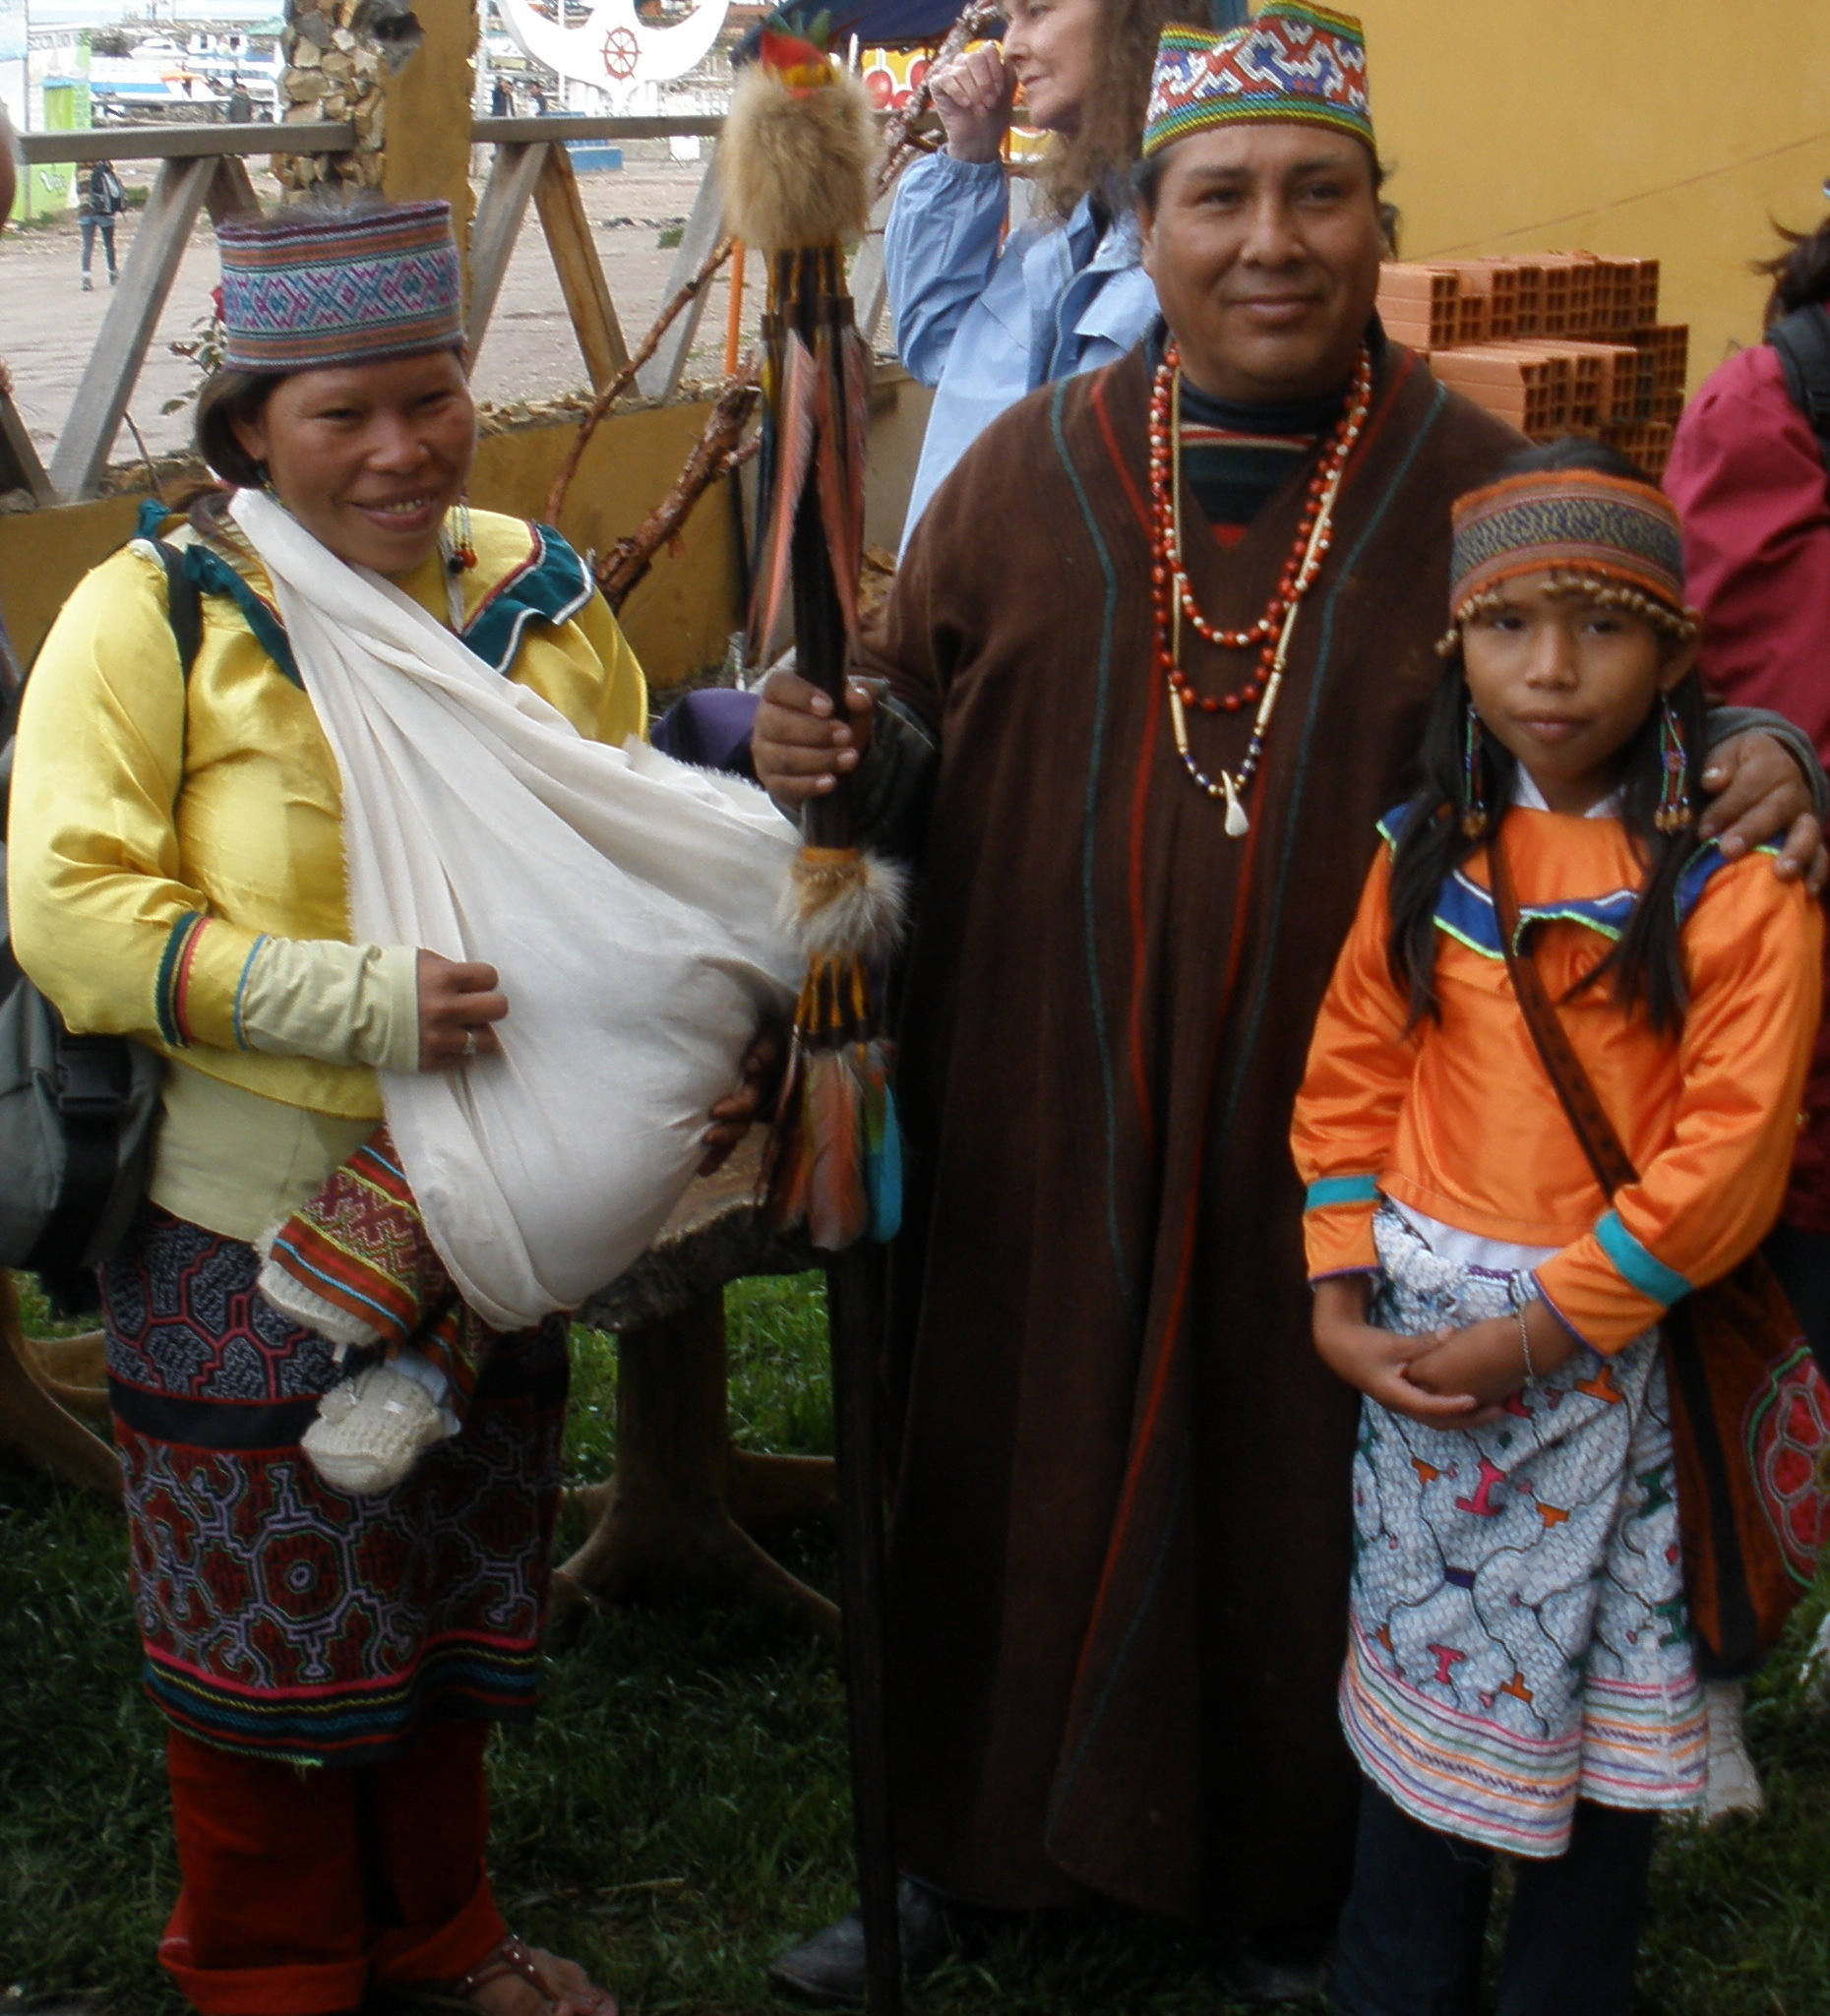 One of our Peruvian shamans and his family